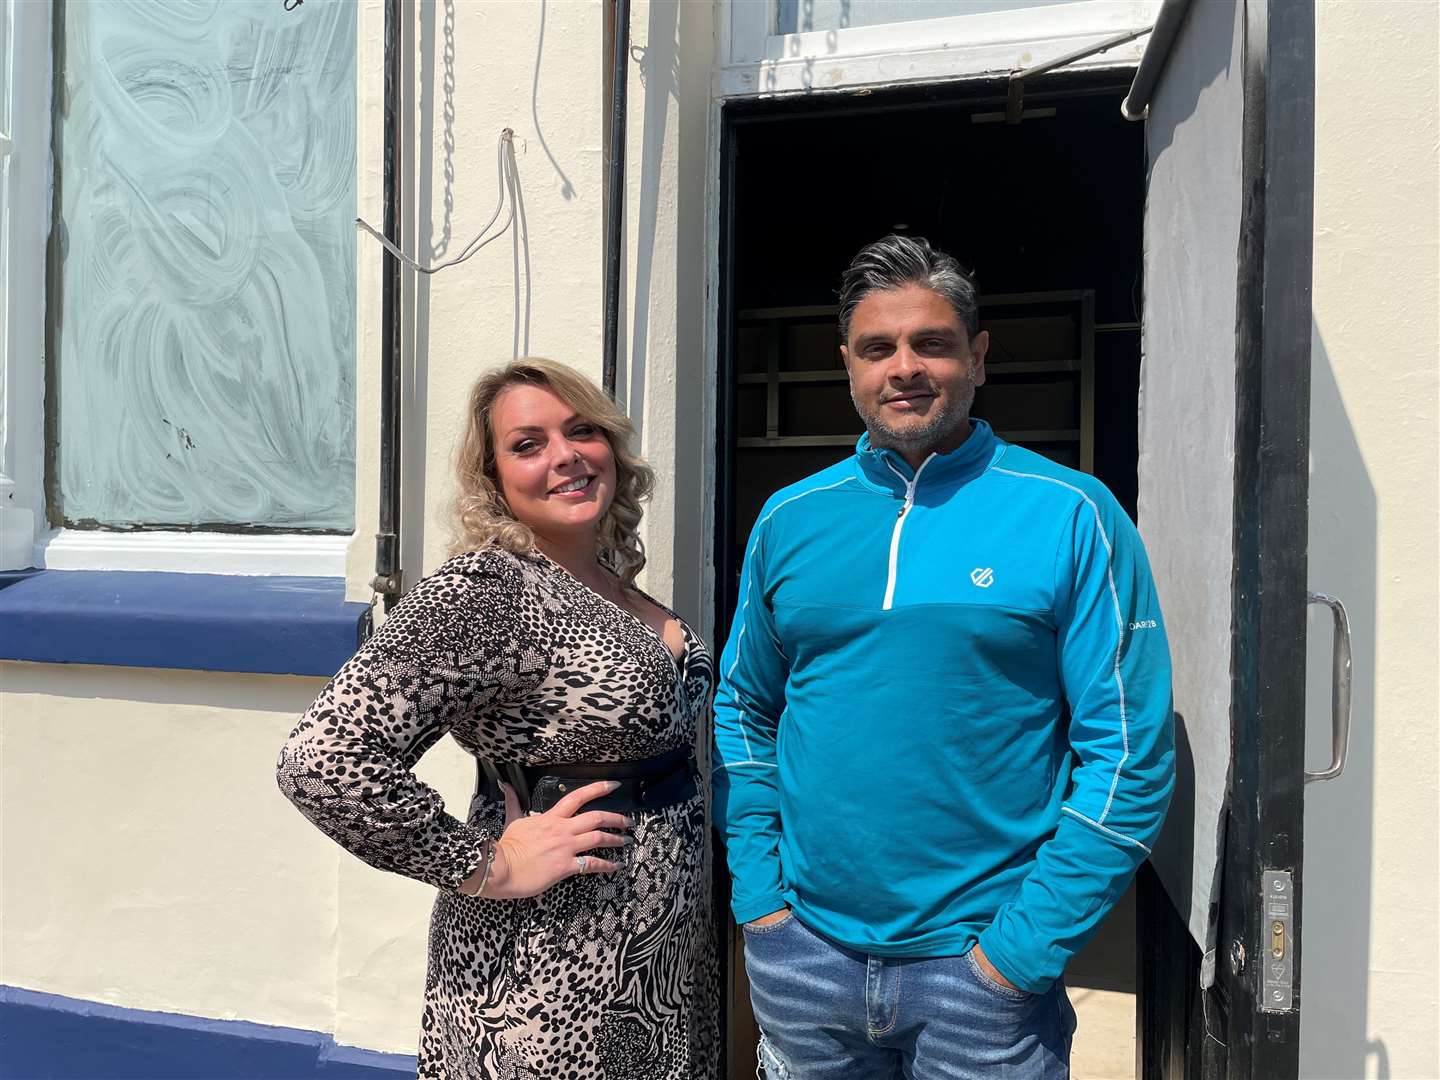 From left: Manager Esther Larney and owner Steve Basi